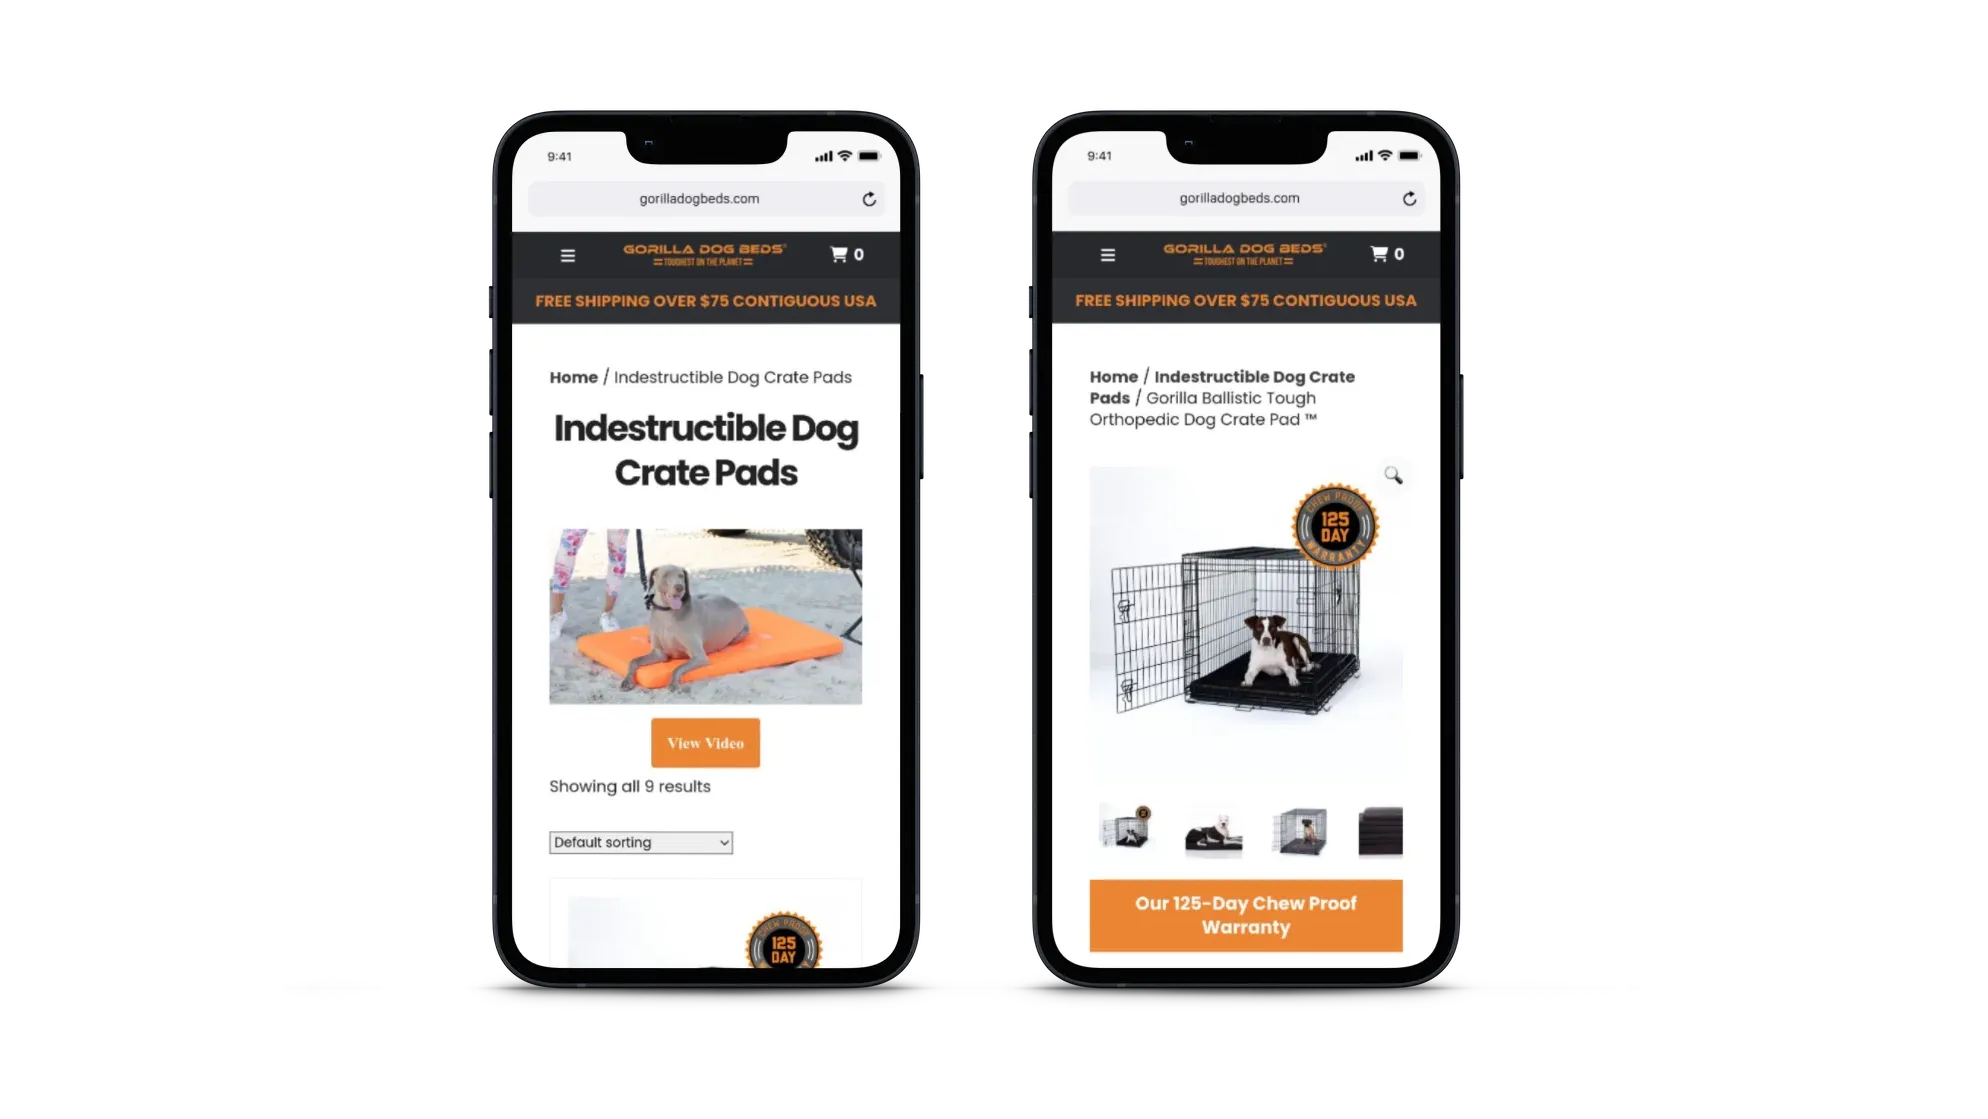 Gorilla Dog Beds on mobile devices